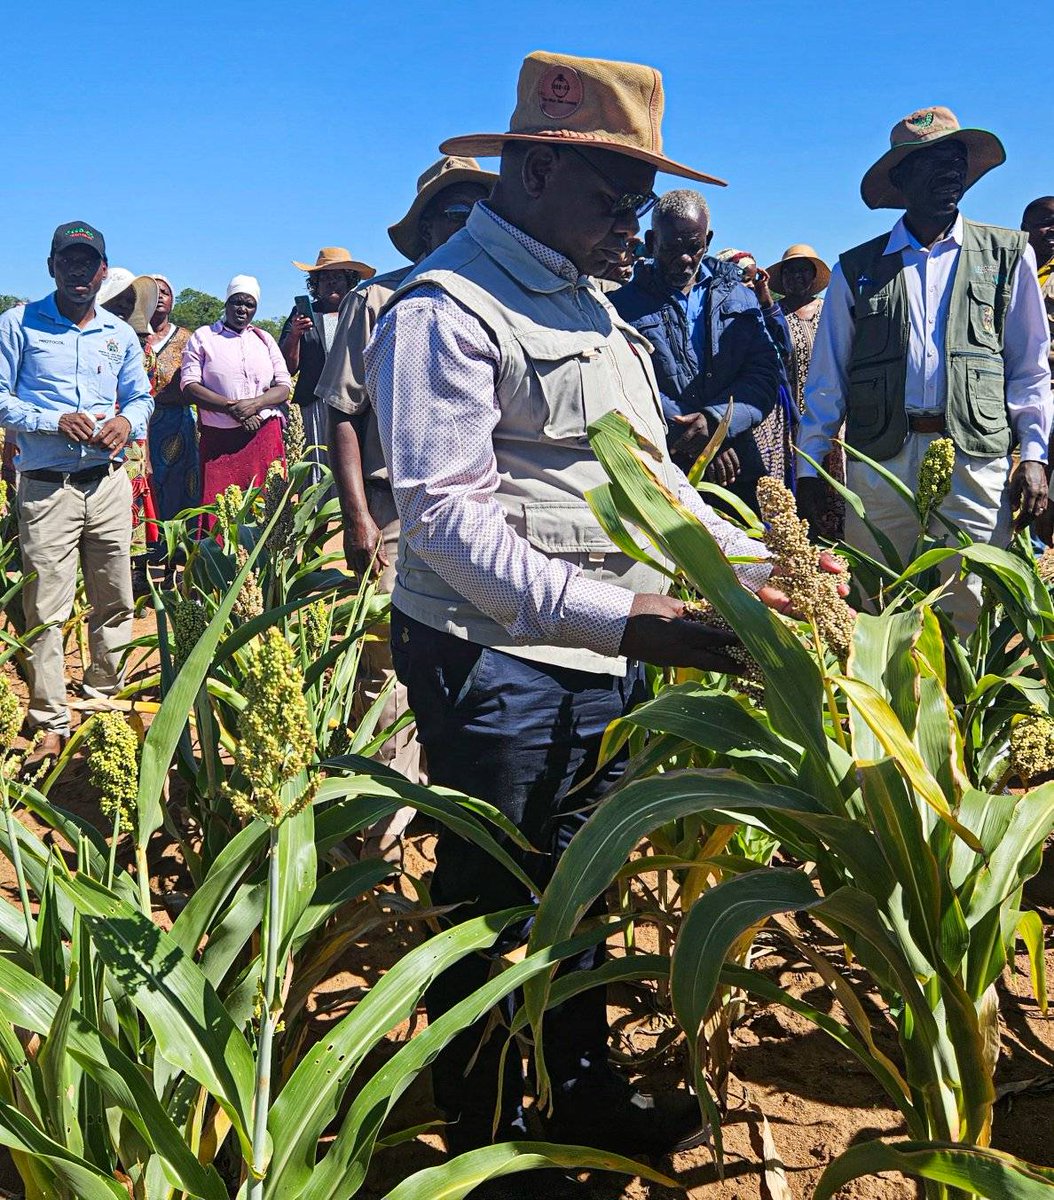 Regardless of any climate variability, a farmer must always respect the dictates of agroecological regions and should be advised of the correct crops to grow to ensure food security from the household to the national level.